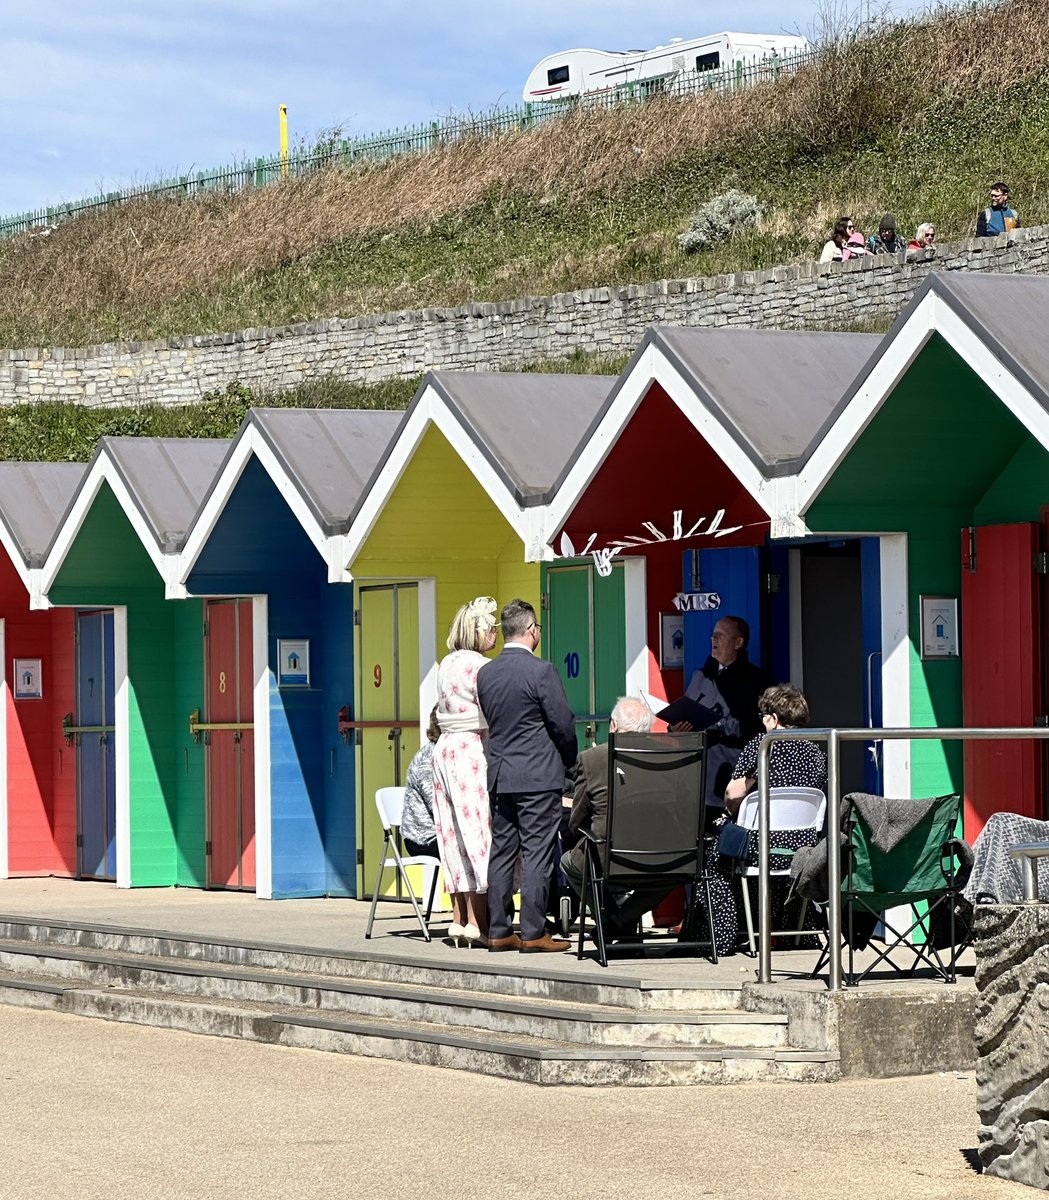 A couple got married in a Barry Island beach hut this week as we walked past. It was fabulous!  #Barrybados